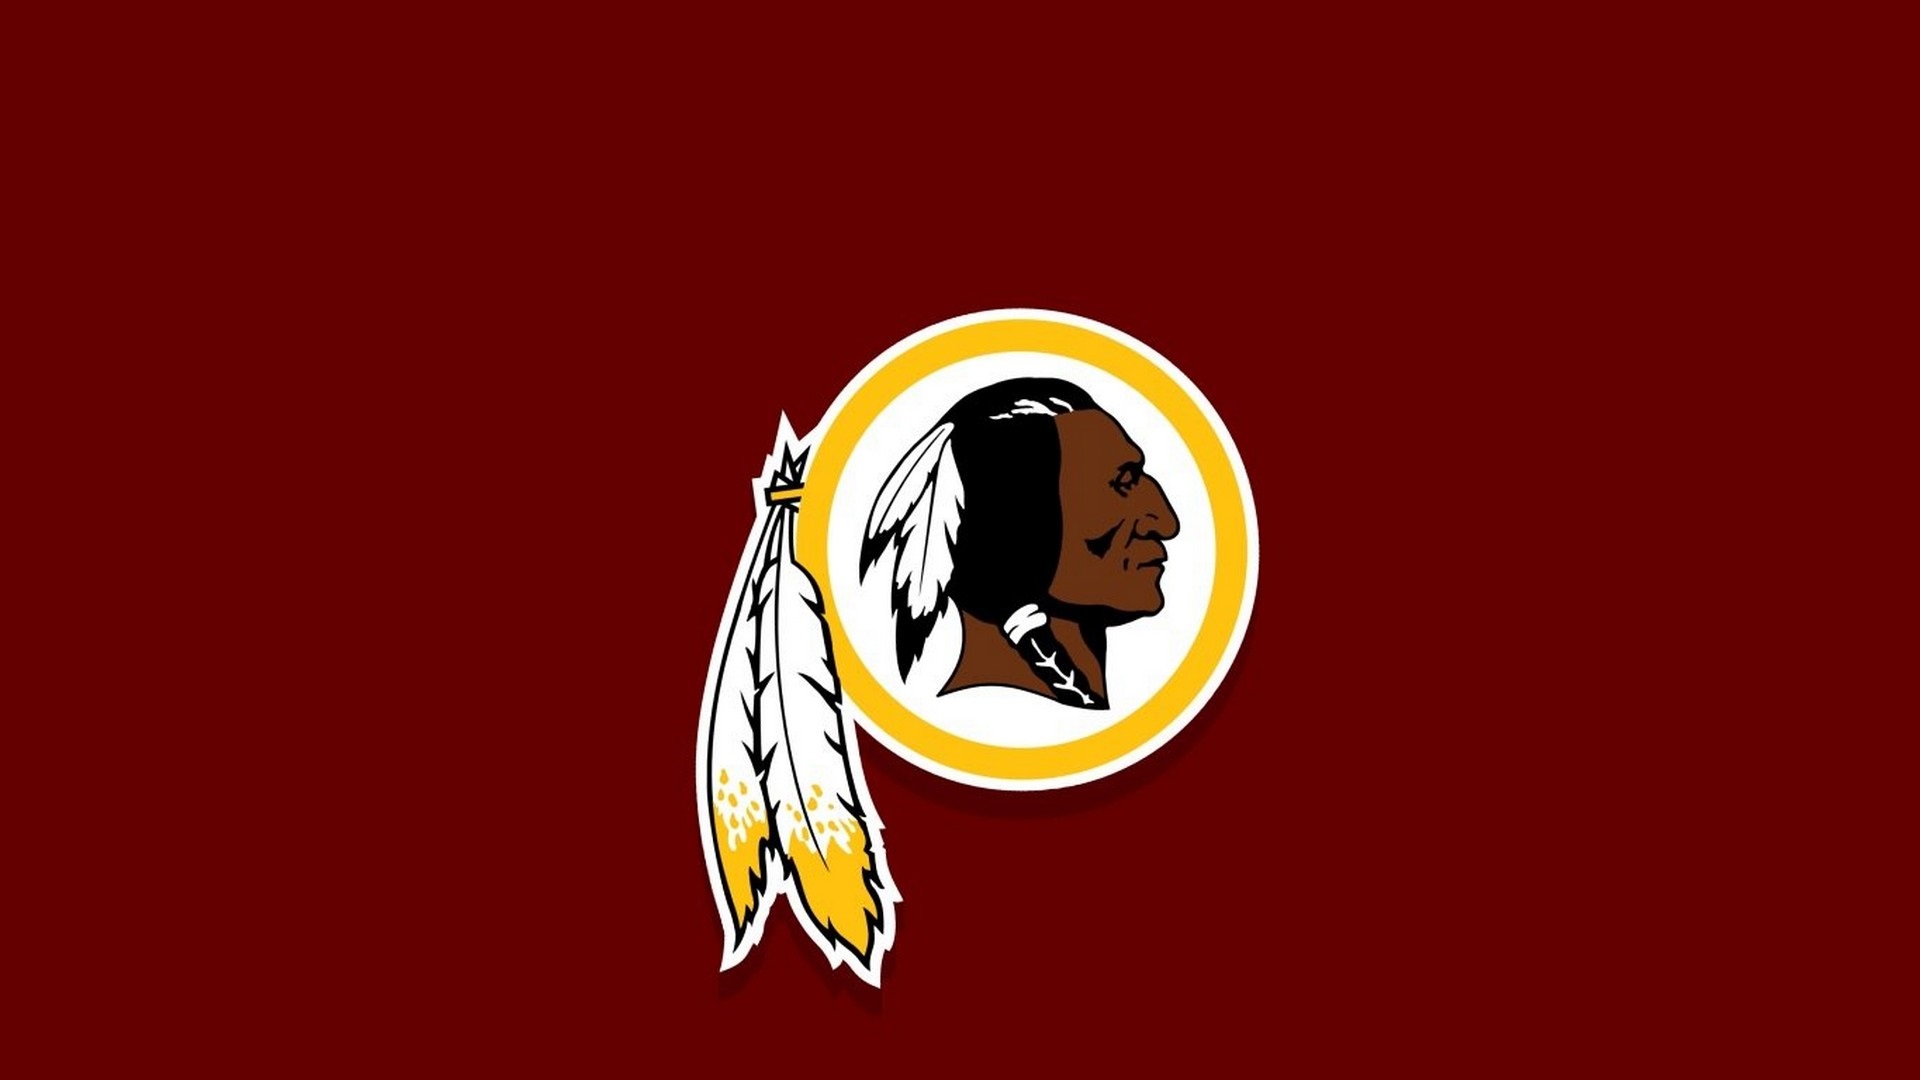 Washington Redskins For PC Wallpaper With high-resolution 1920X1080 pixel. You can use this wallpaper for your Mac or Windows Desktop Background, iPhone, Android or Tablet and another Smartphone device